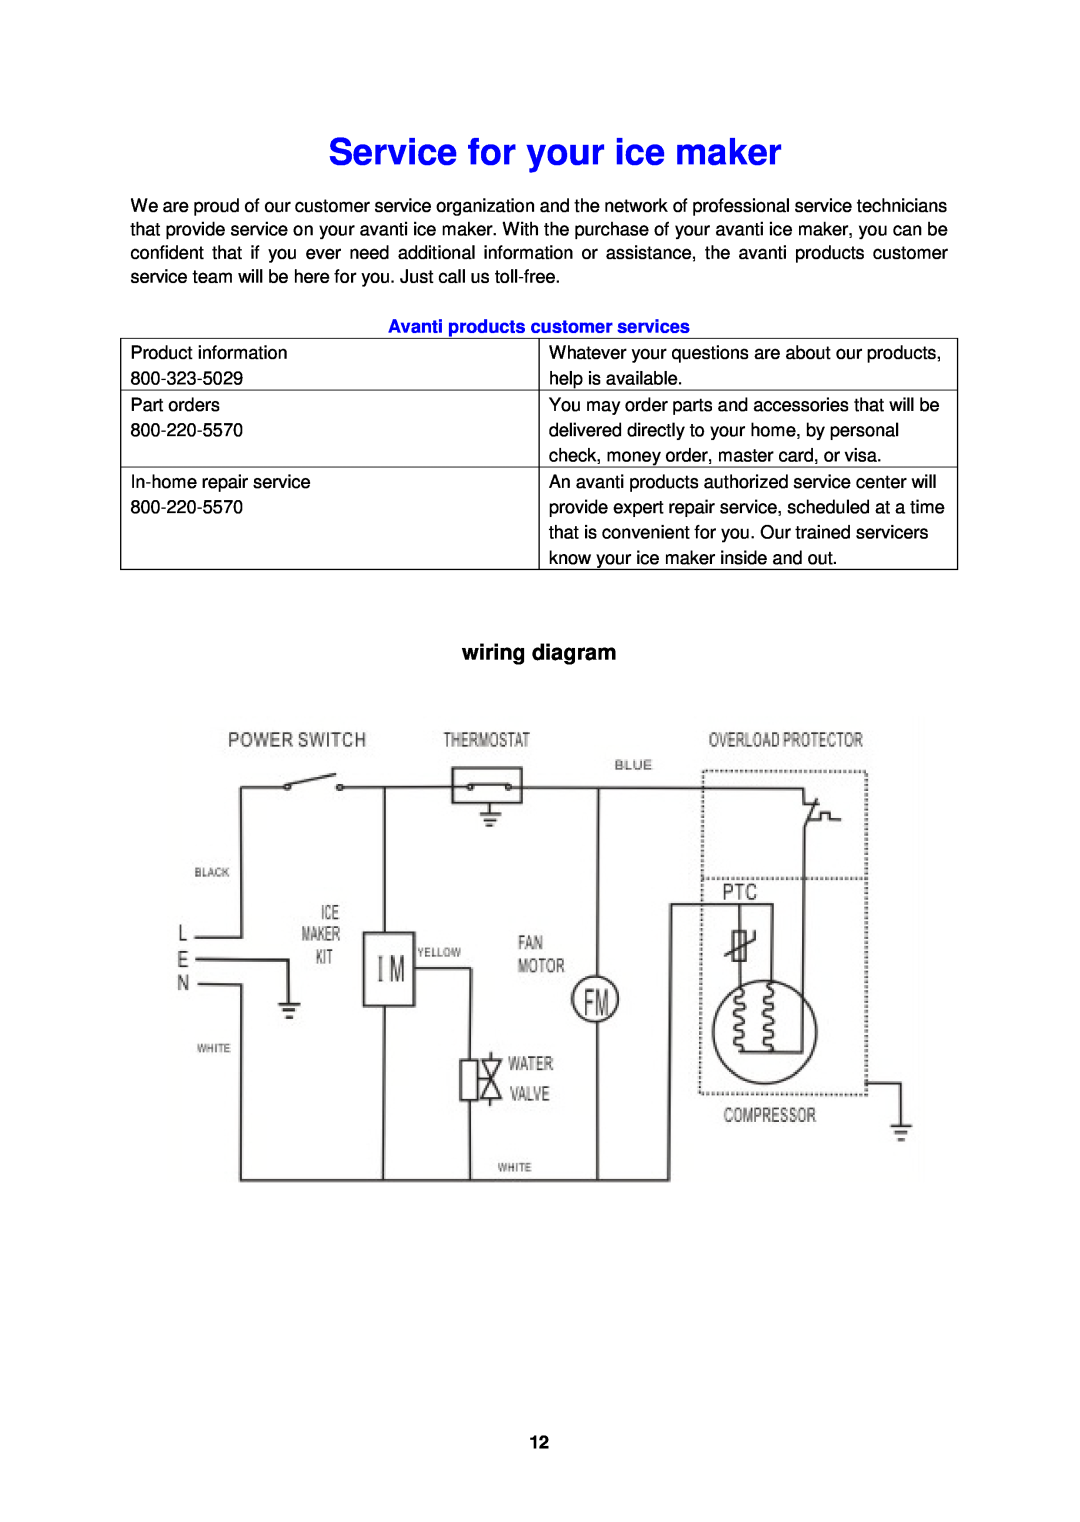 Avanti IM15SS instruction manual Service for your ice maker, wiring diagram, Avanti products customer services 